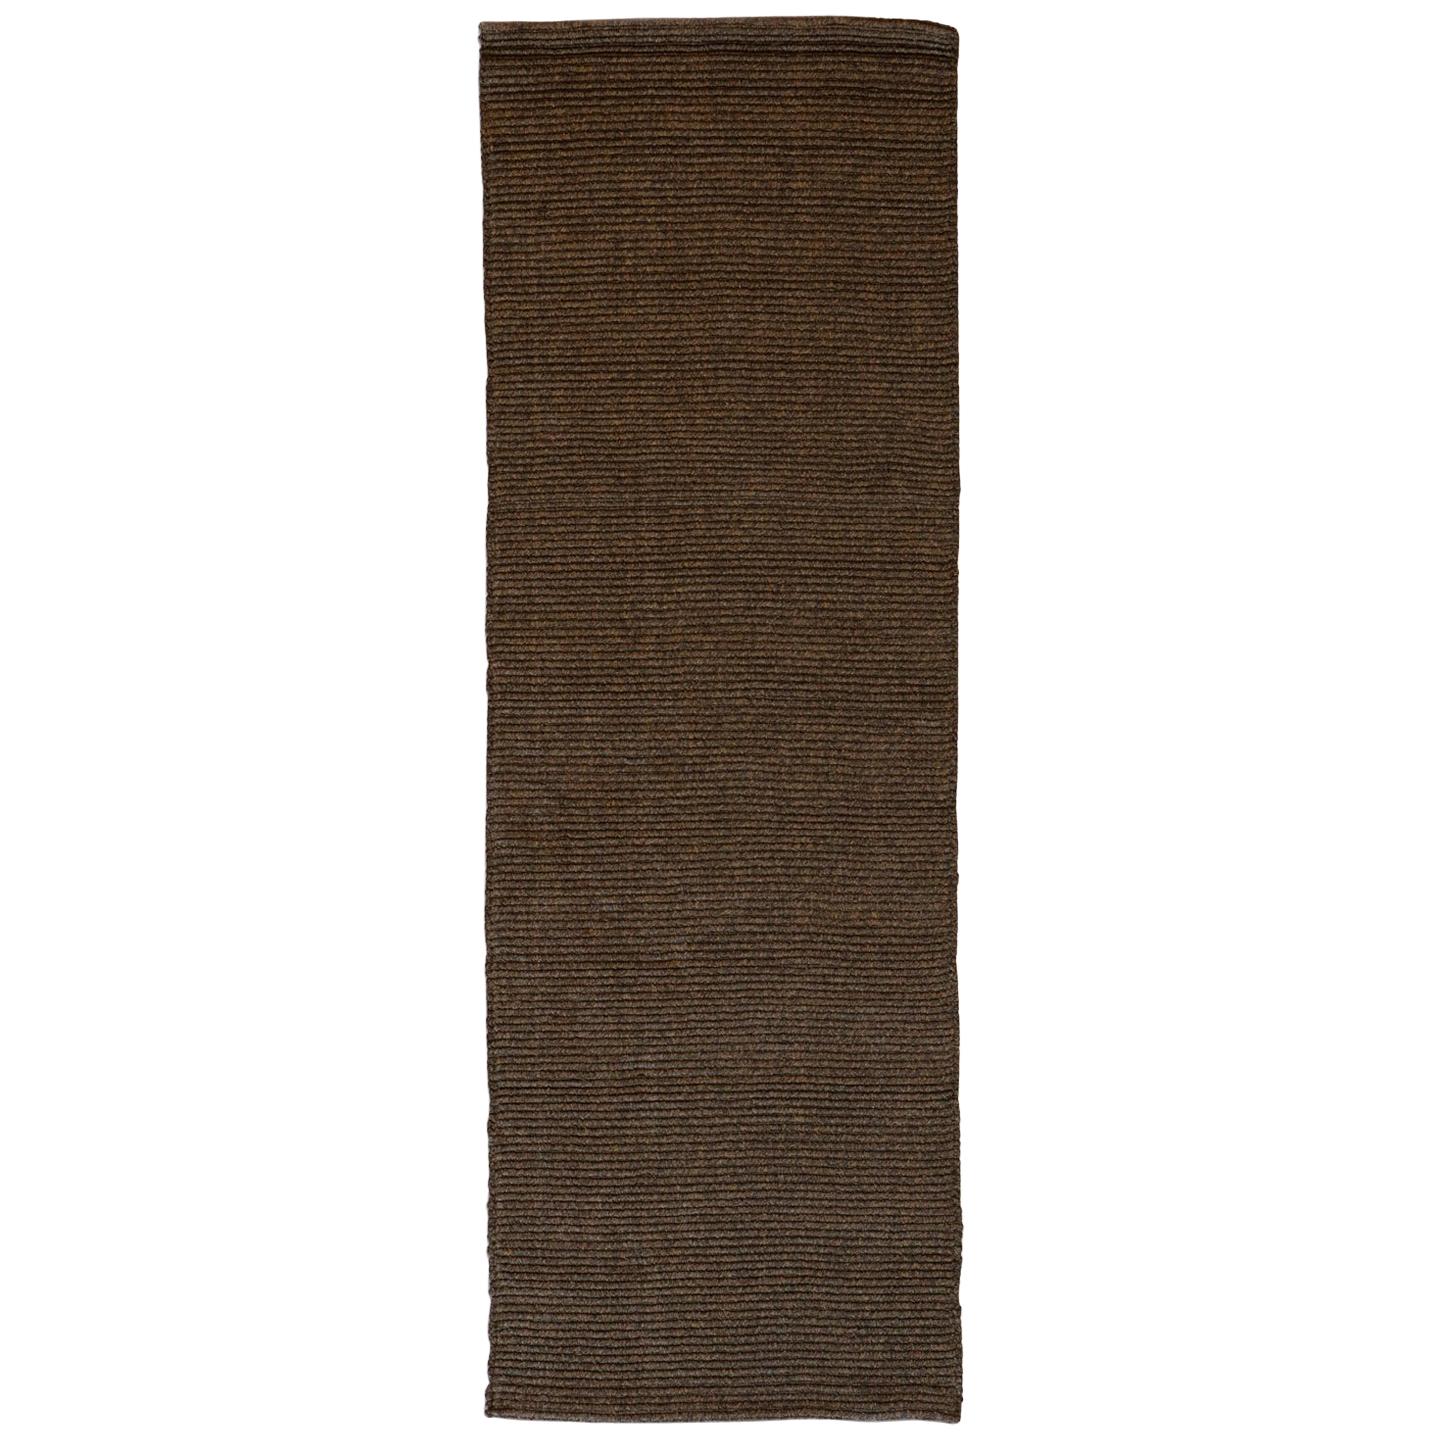 Resistant In & Out Spring Trend Brown Rug by Deanna Comellini In Stock 70x200 cm For Sale